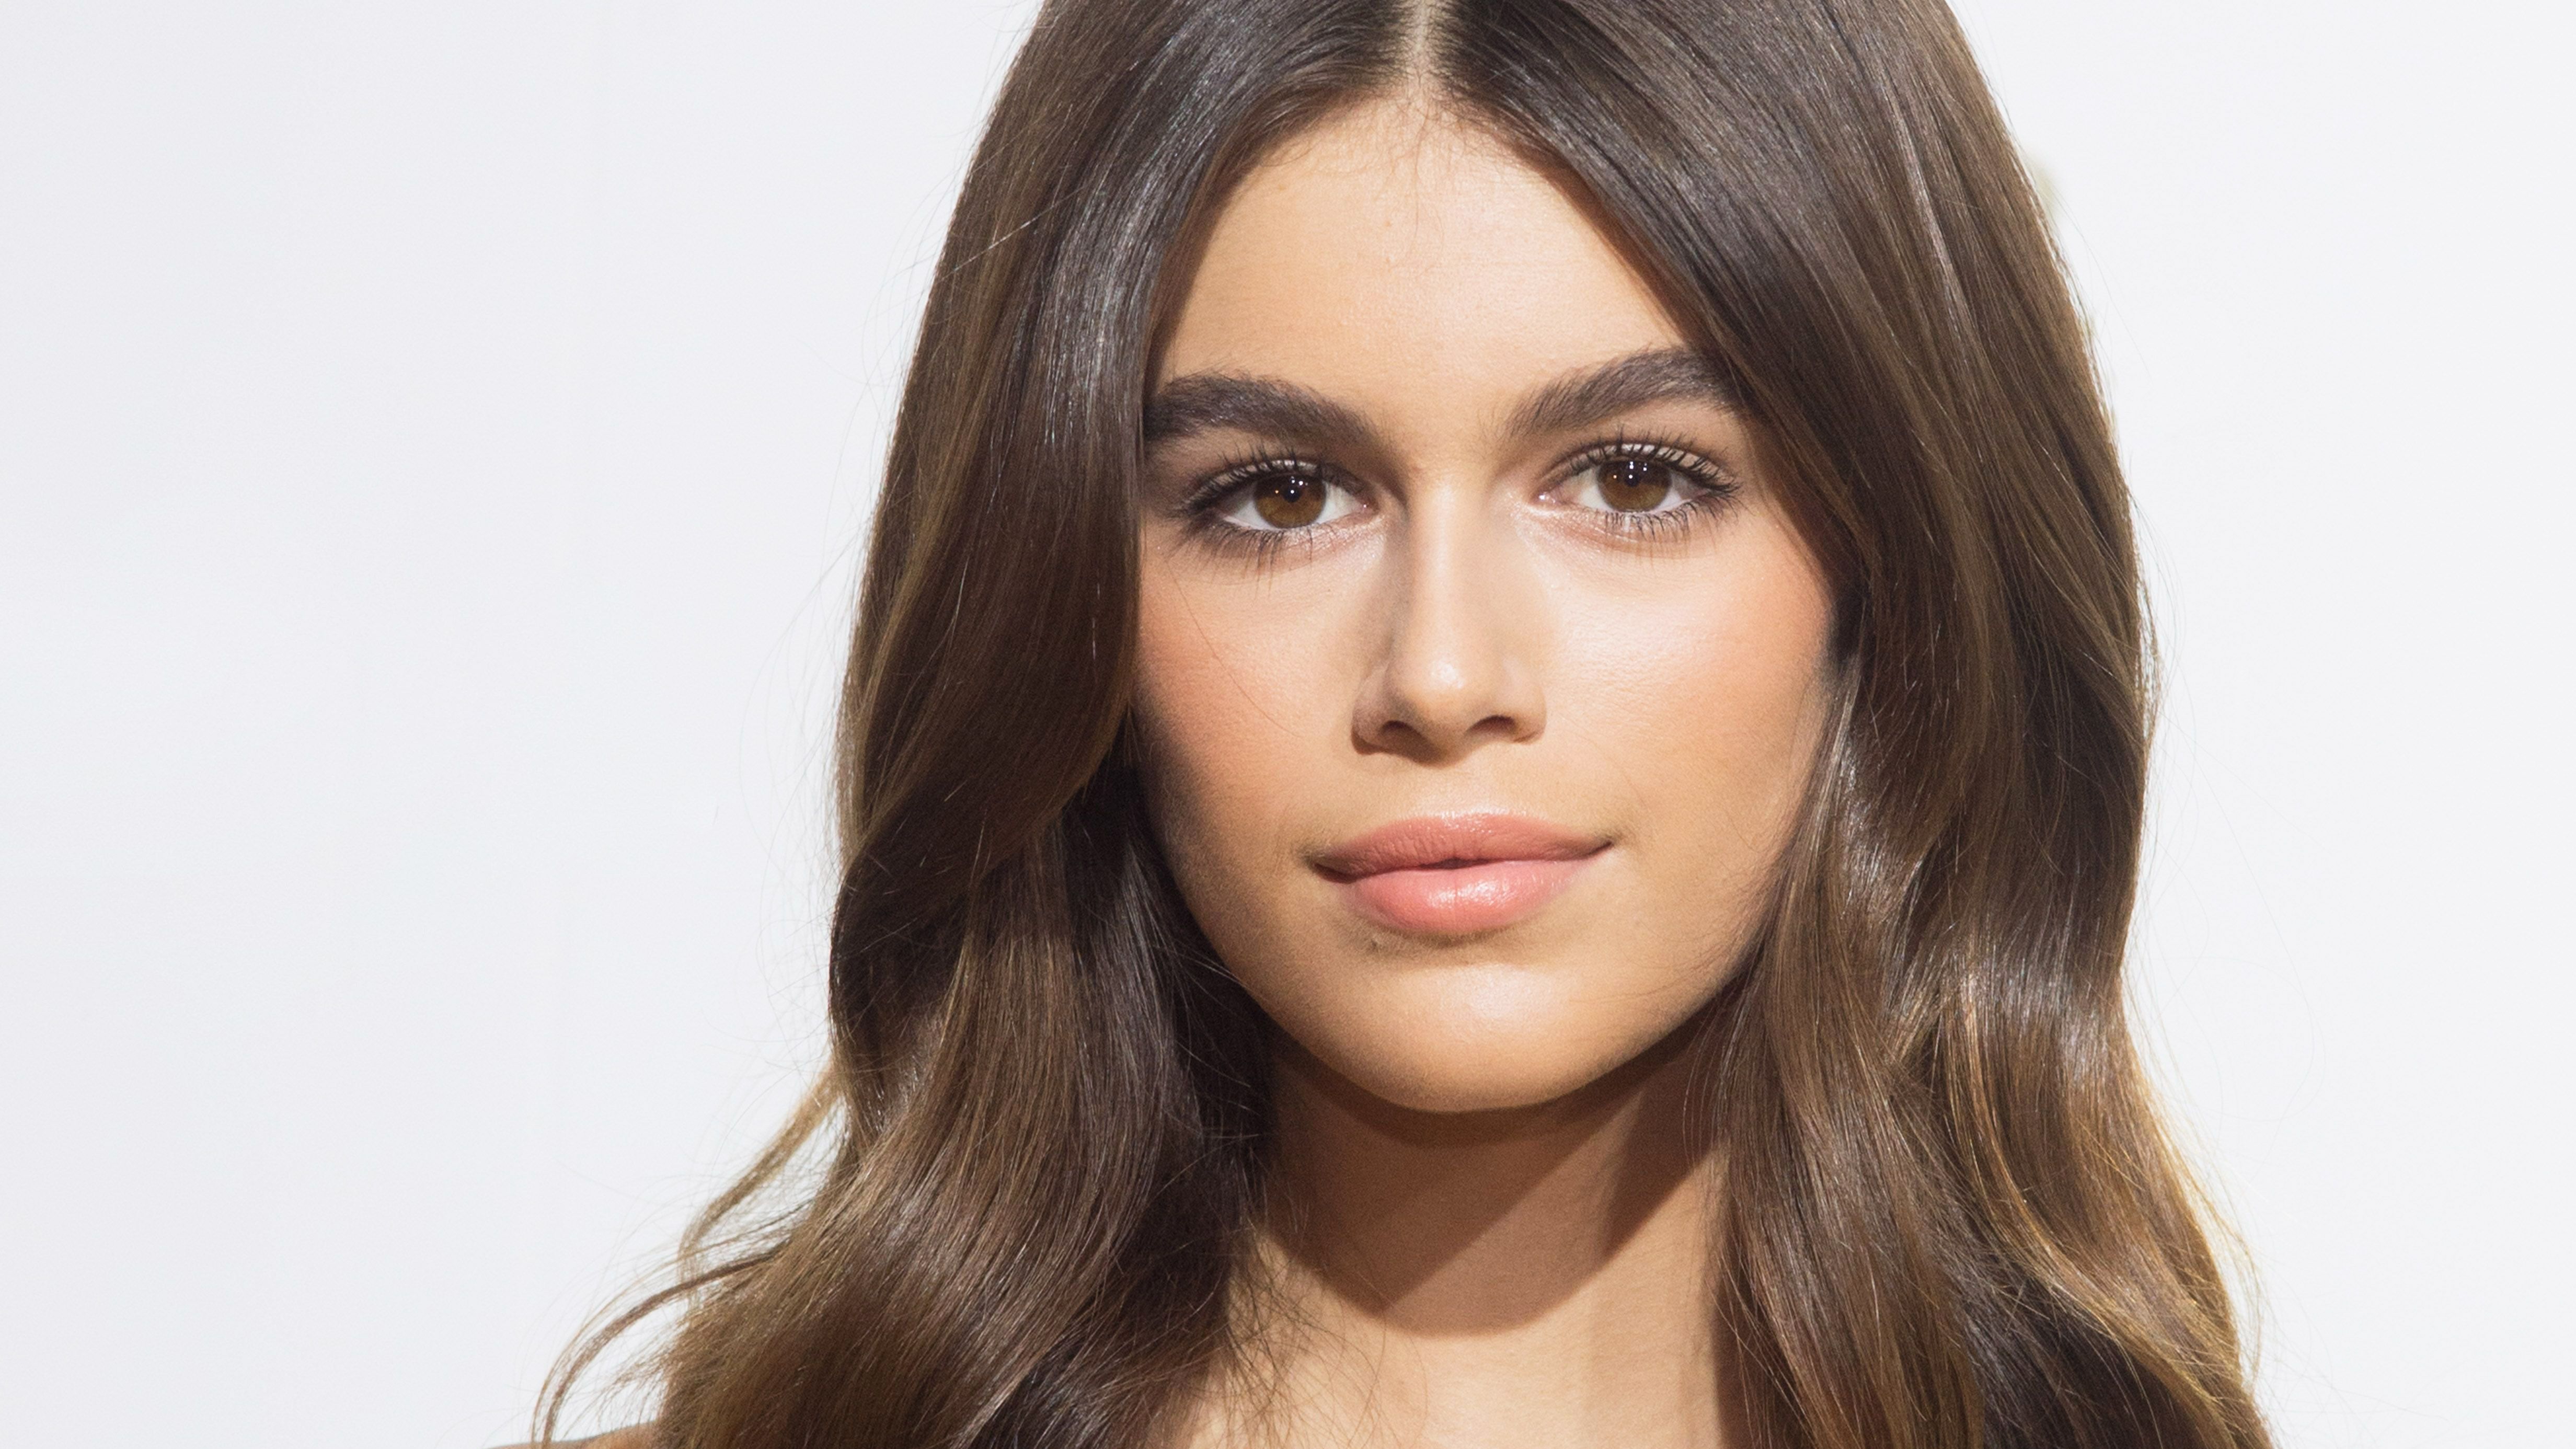 Model Kaia Gerber Is The 17-Year-Old Face Of YSL Beauty Kaia Gerber ...